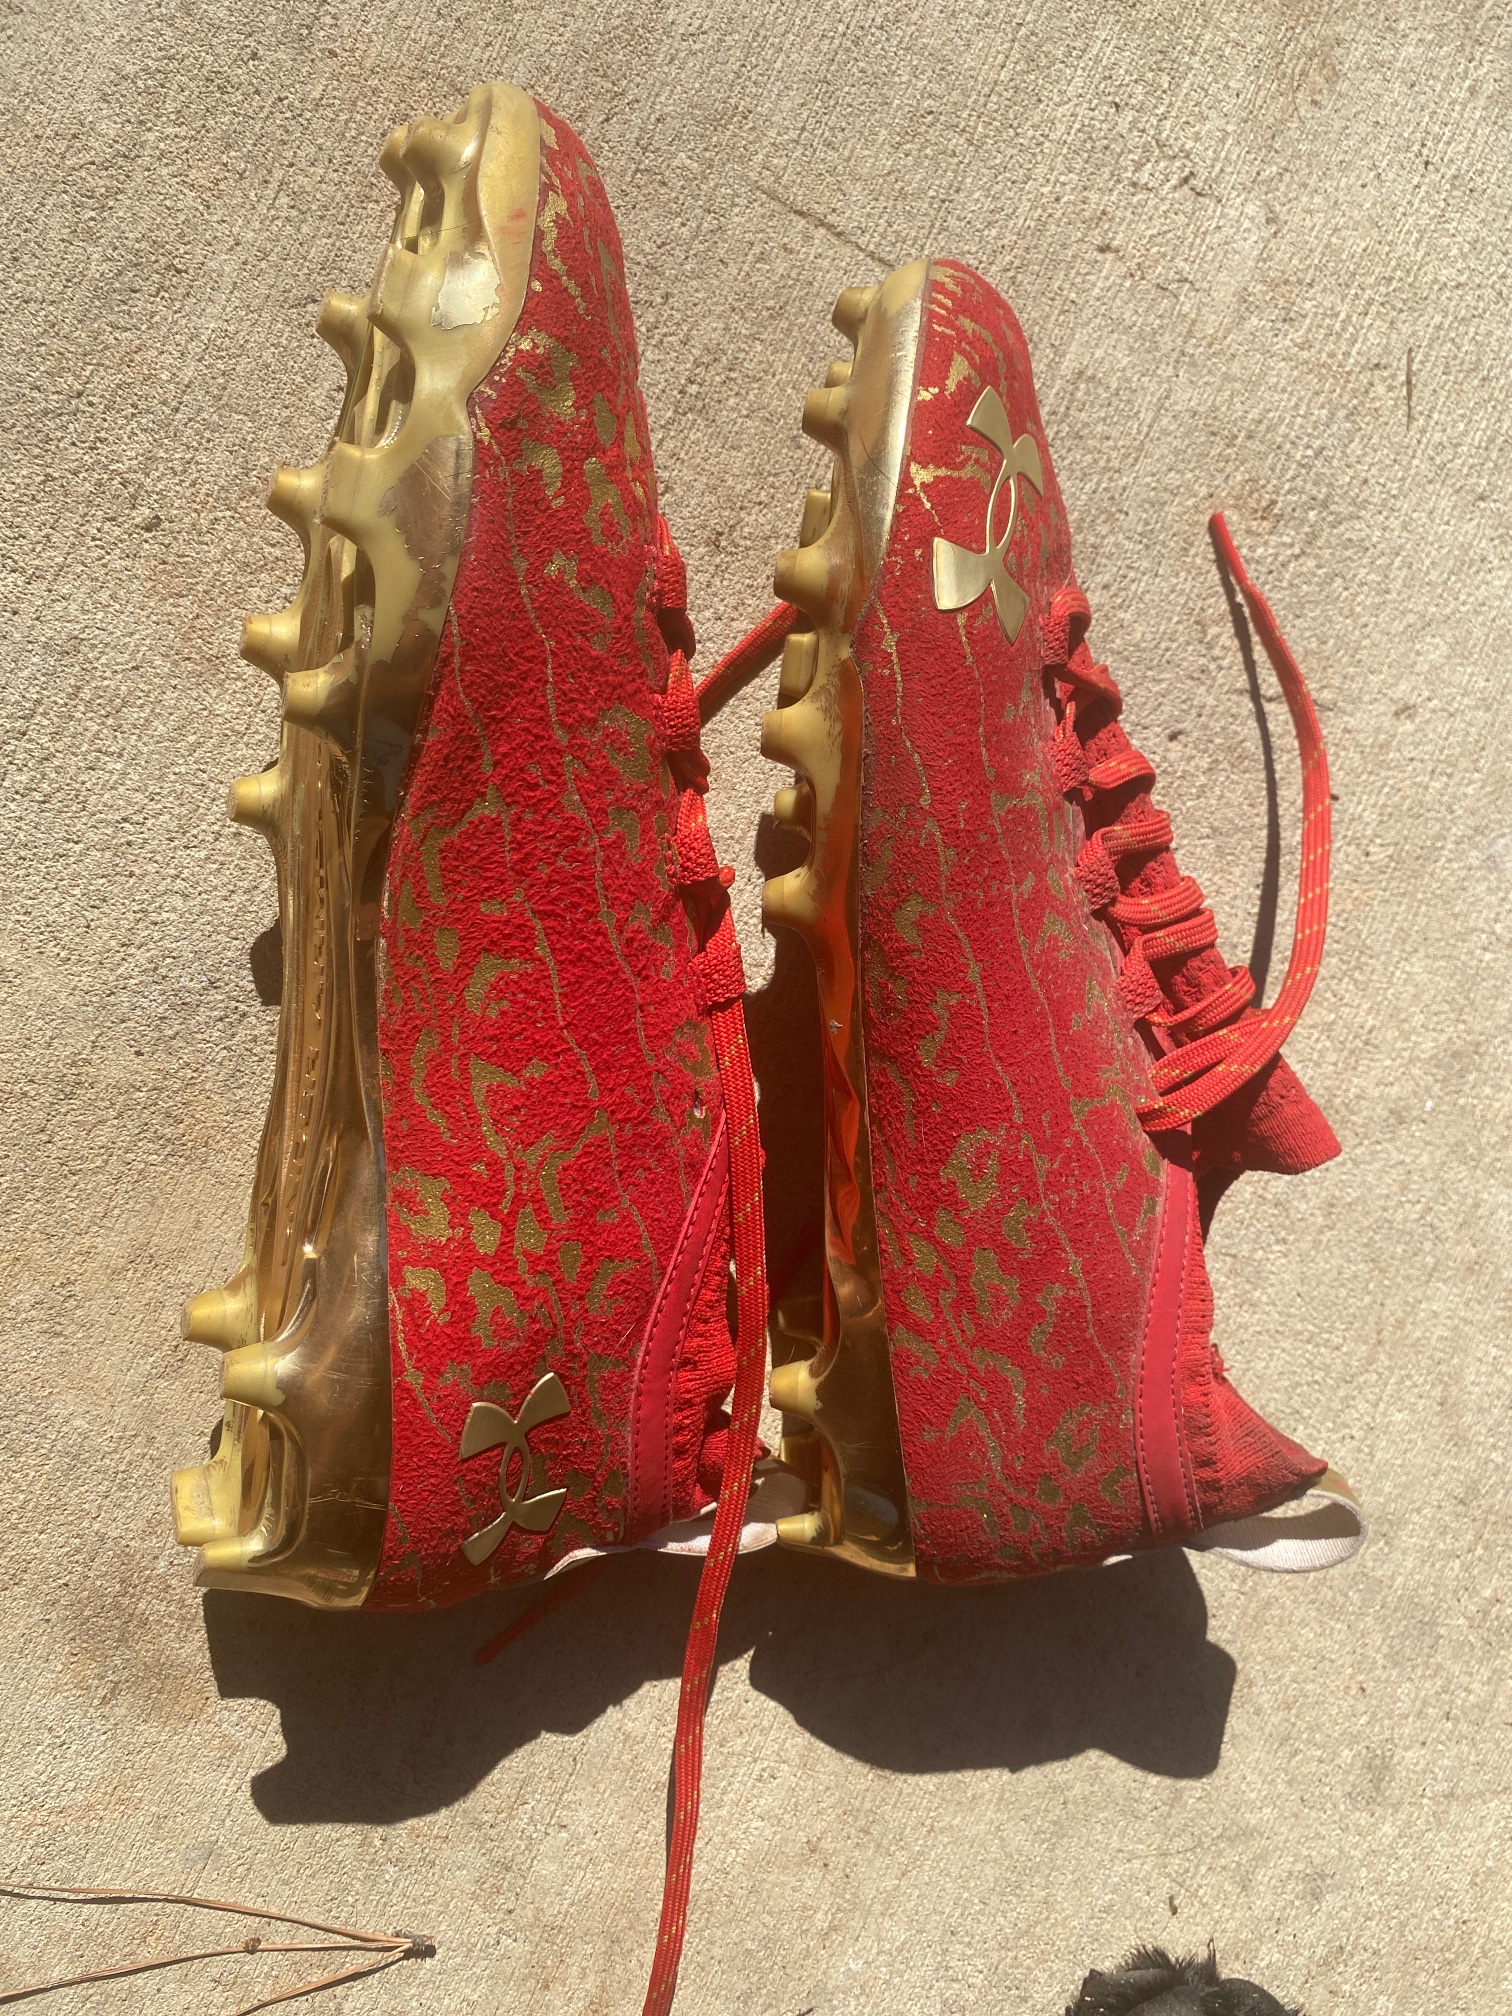 Used Men's Size 12 (Women's 13) Molded Cleats Under Armour Low Top Spotlight MC